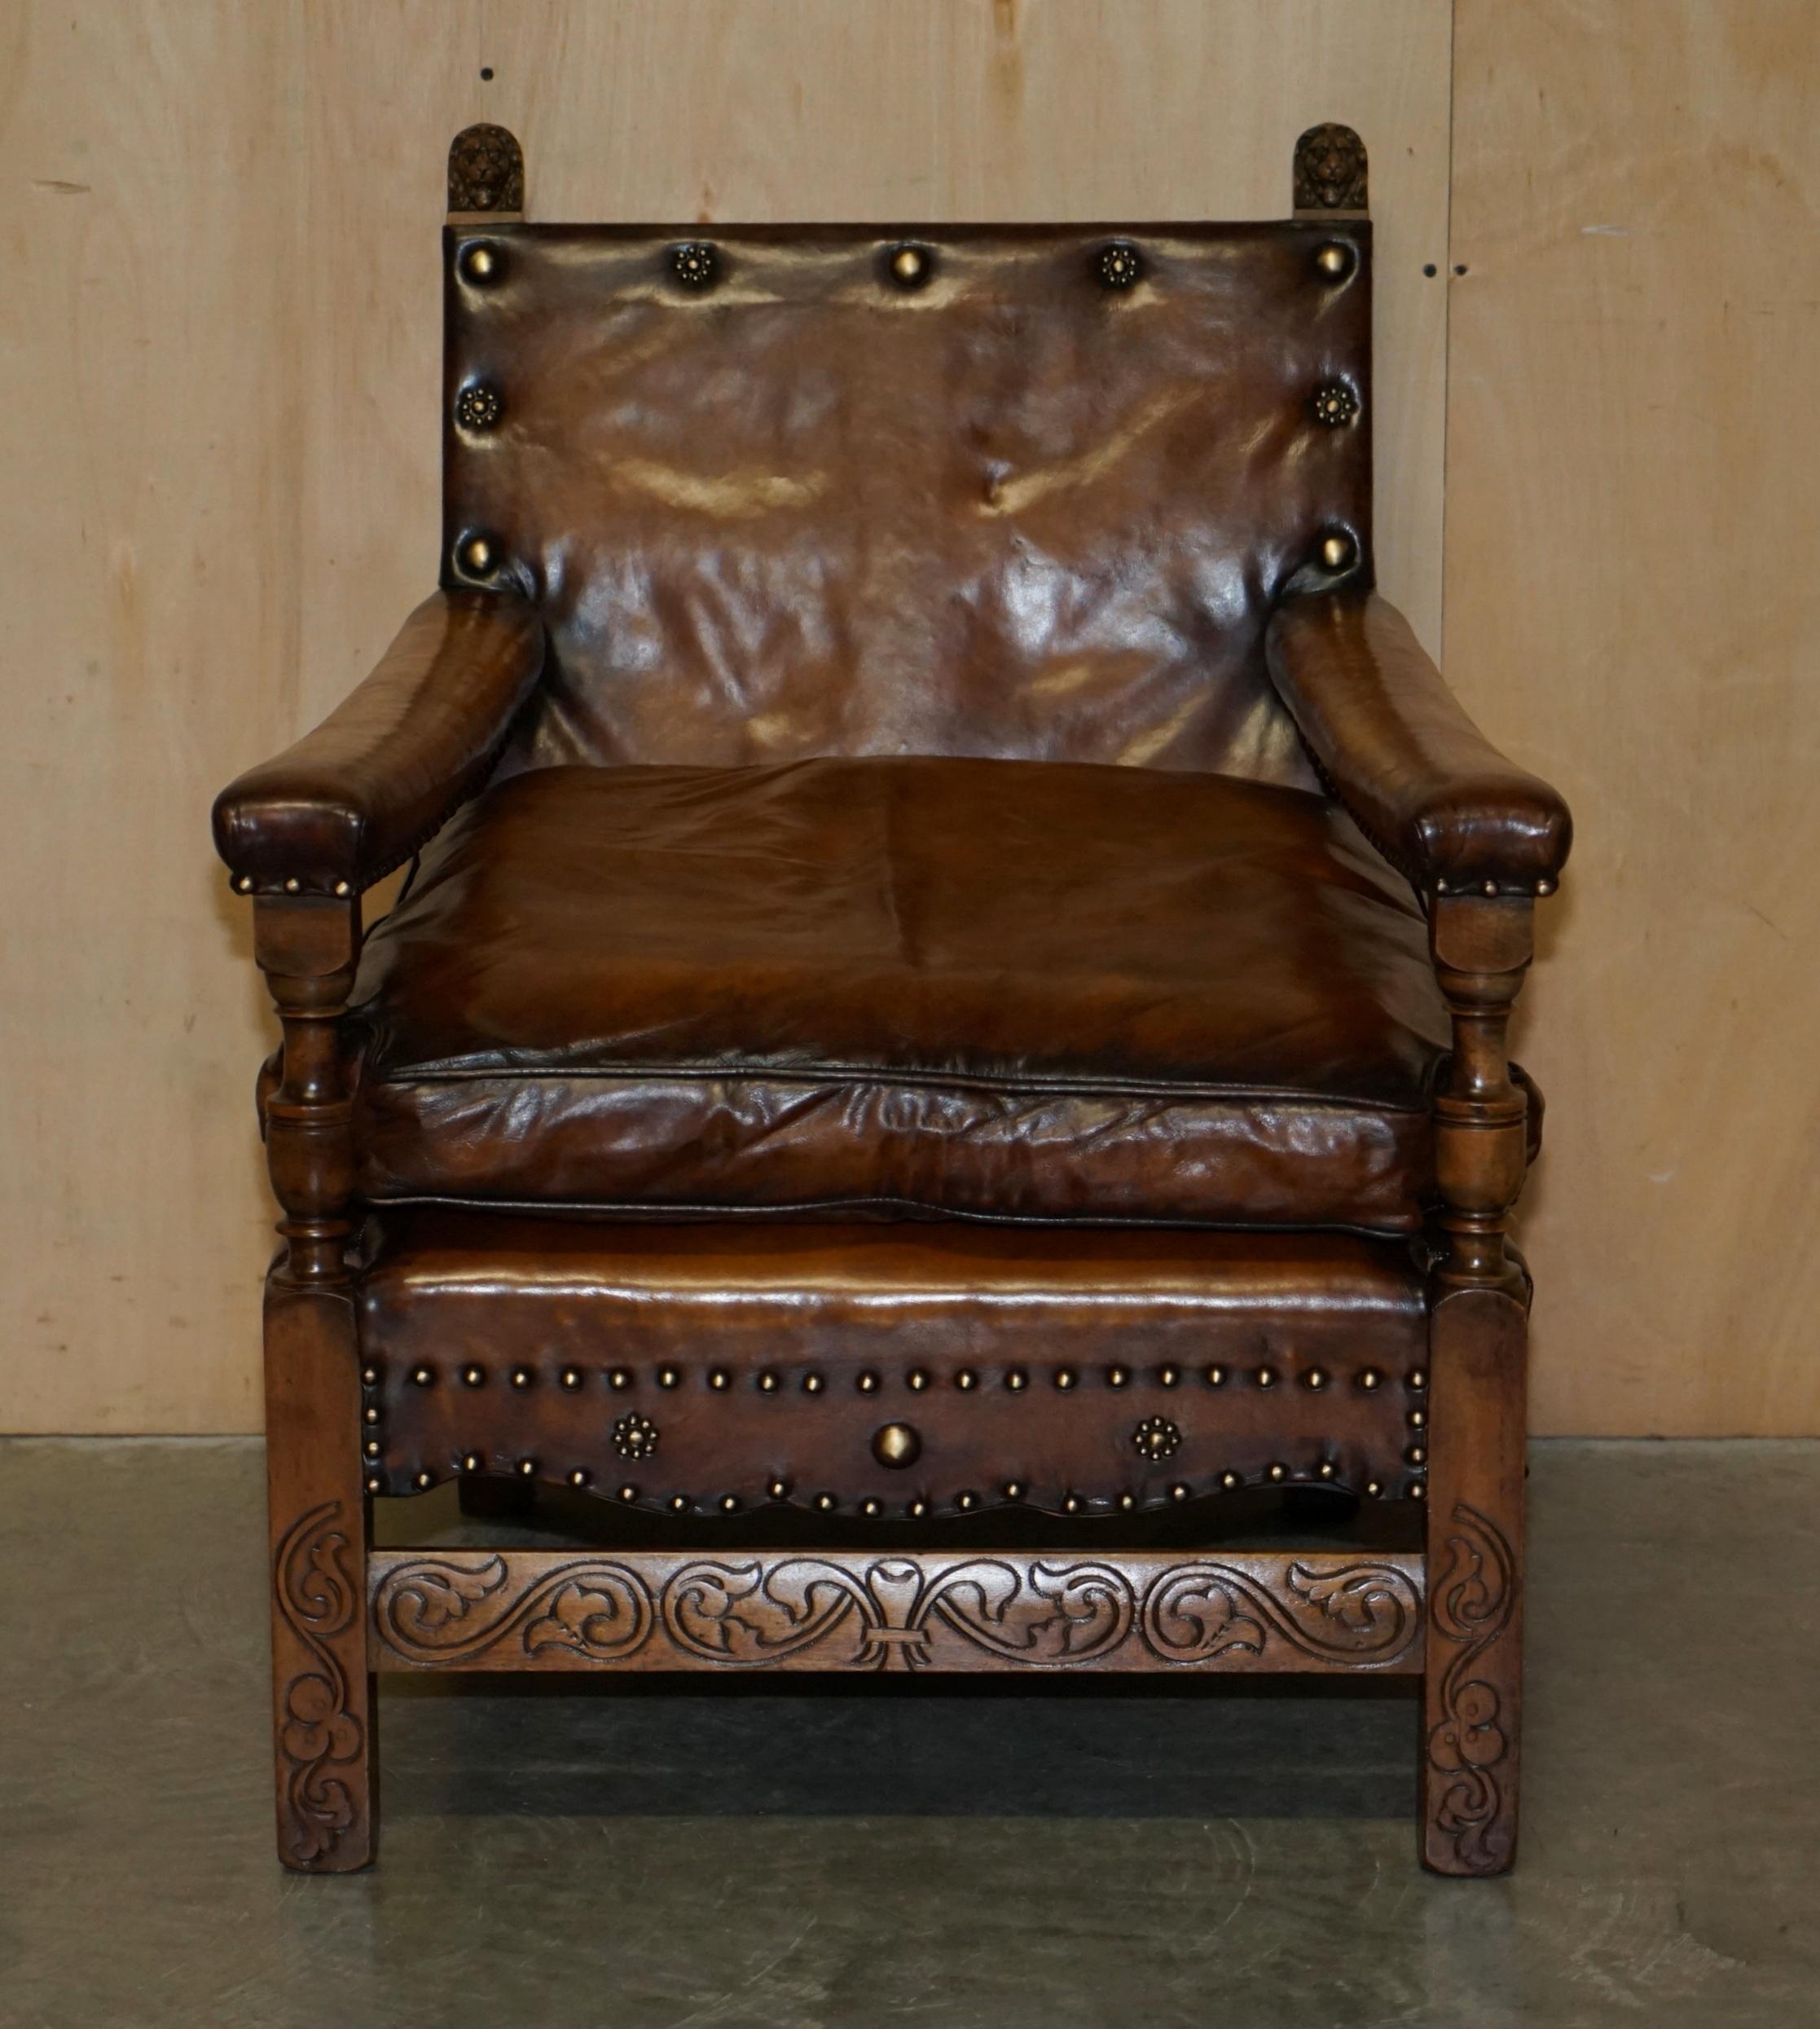 We are delighted to offer for sale this exceptional hand carved Edwardian armchair with Lion finials and hand dyed brown leather upholstery finished with antiqued bronzed oversized studs 

A very good looking and decorative piece, the upholstery